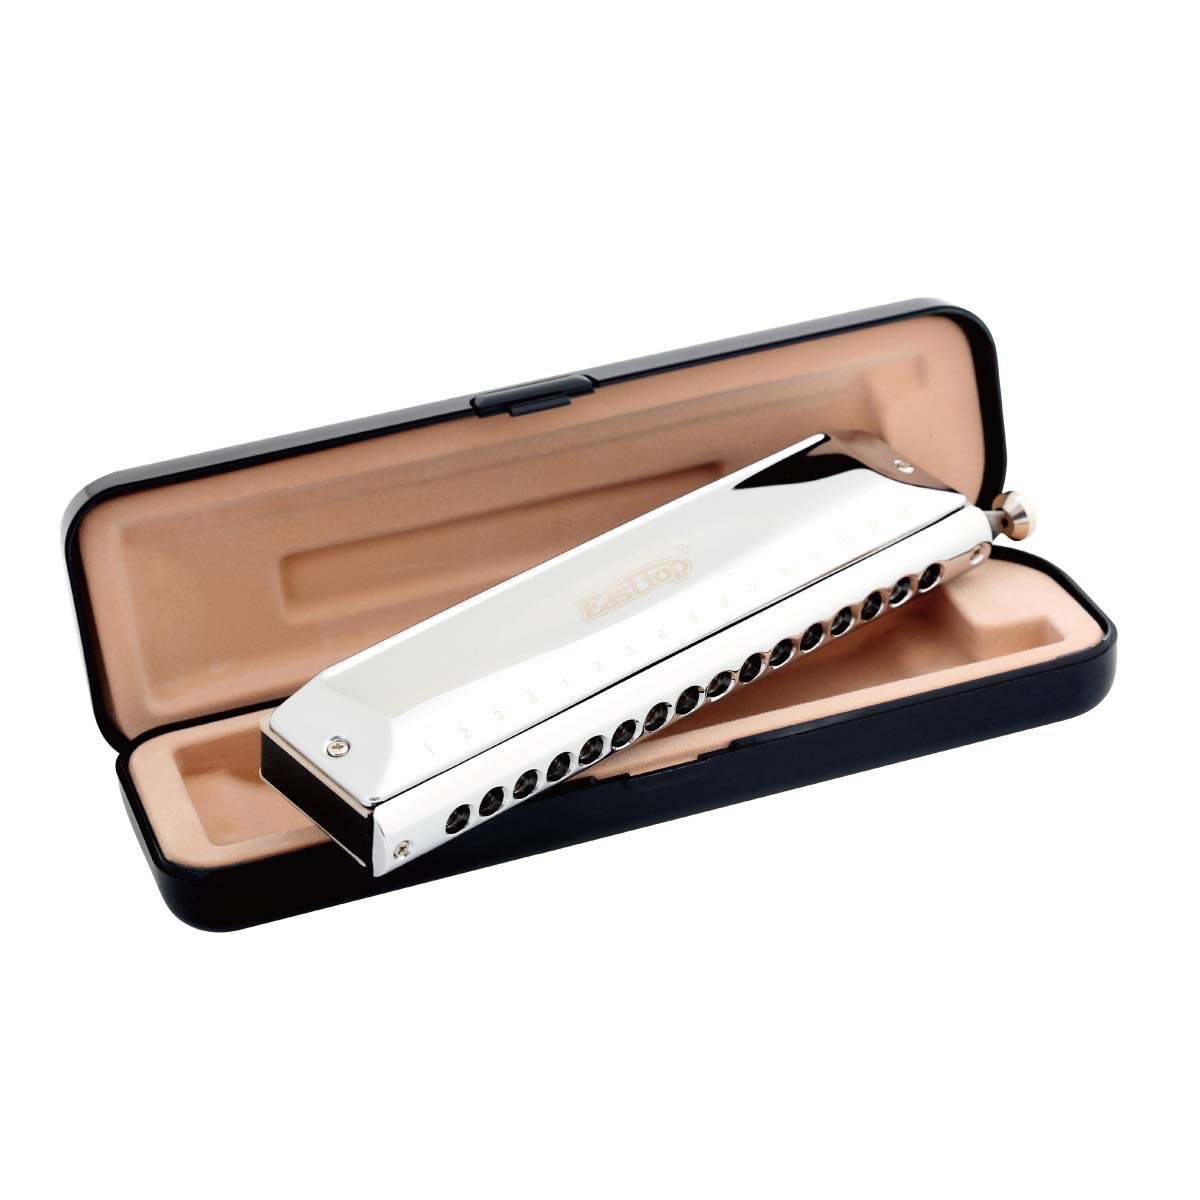 East top 16 Holes 64 Tonse Chromatic Harmonica Key of C, Chromatic Mouth Organ Harmonica for Adults, Professionals and Students (SR) - Easttop harmonica